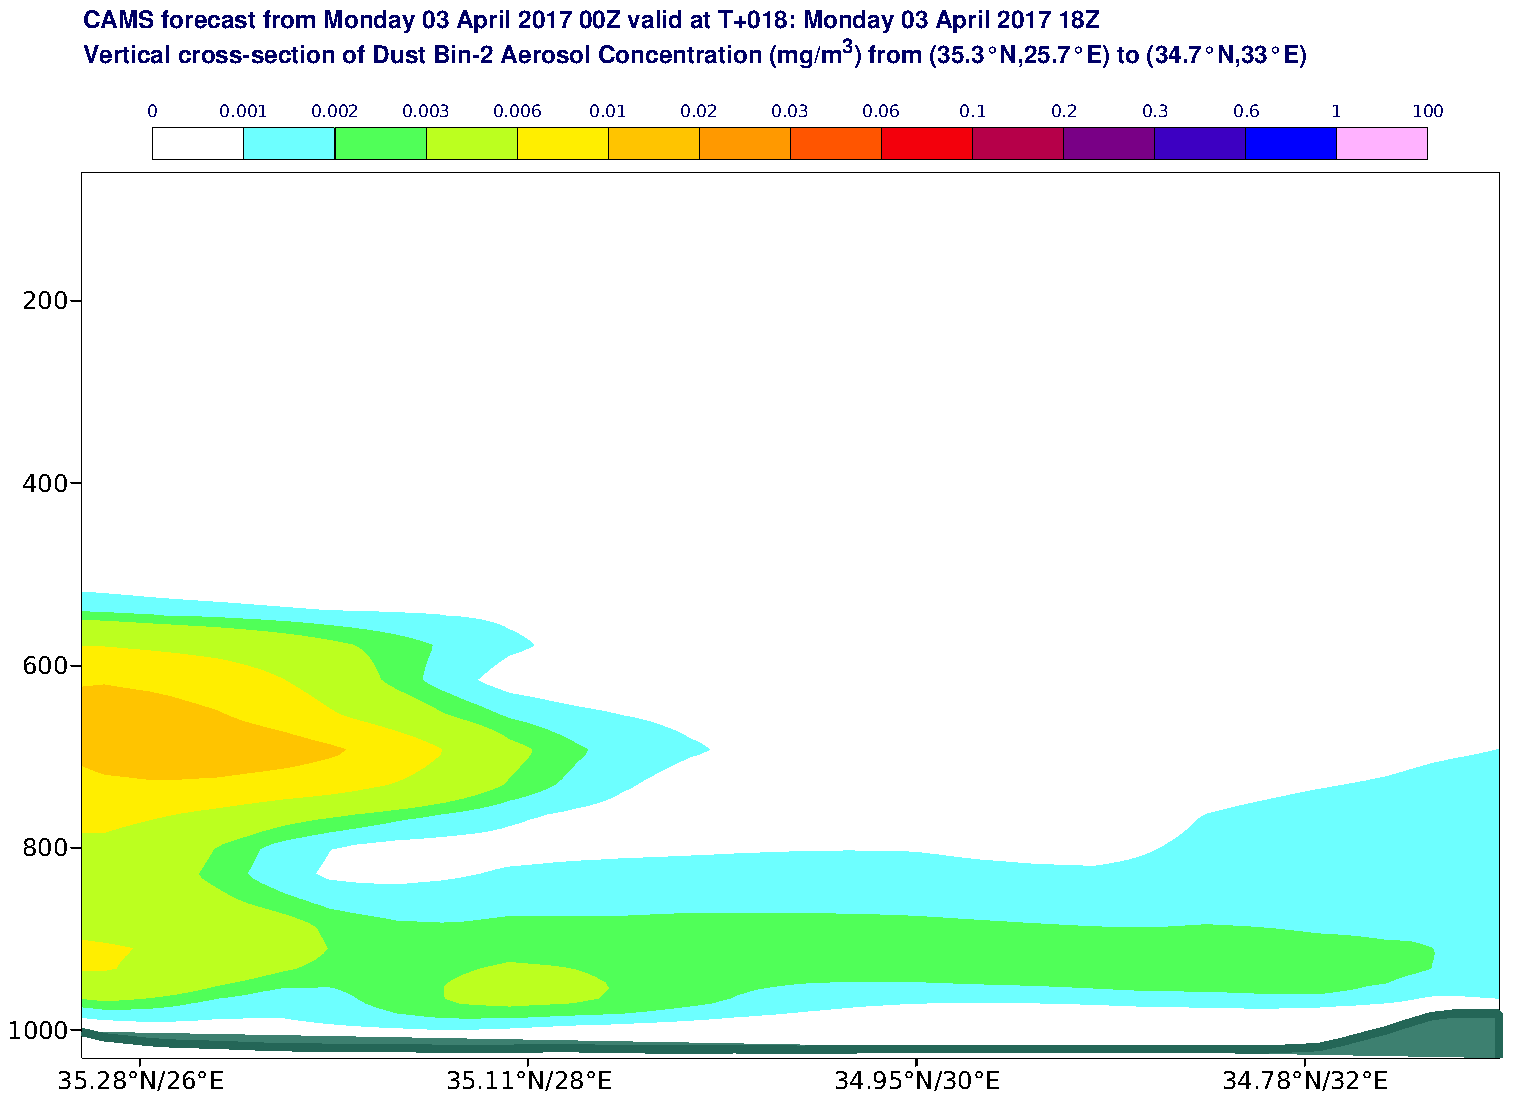 Vertical cross-section of Dust Bin-2 Aerosol Concentration (mg/m3) valid at T18 - 2017-04-03 18:00